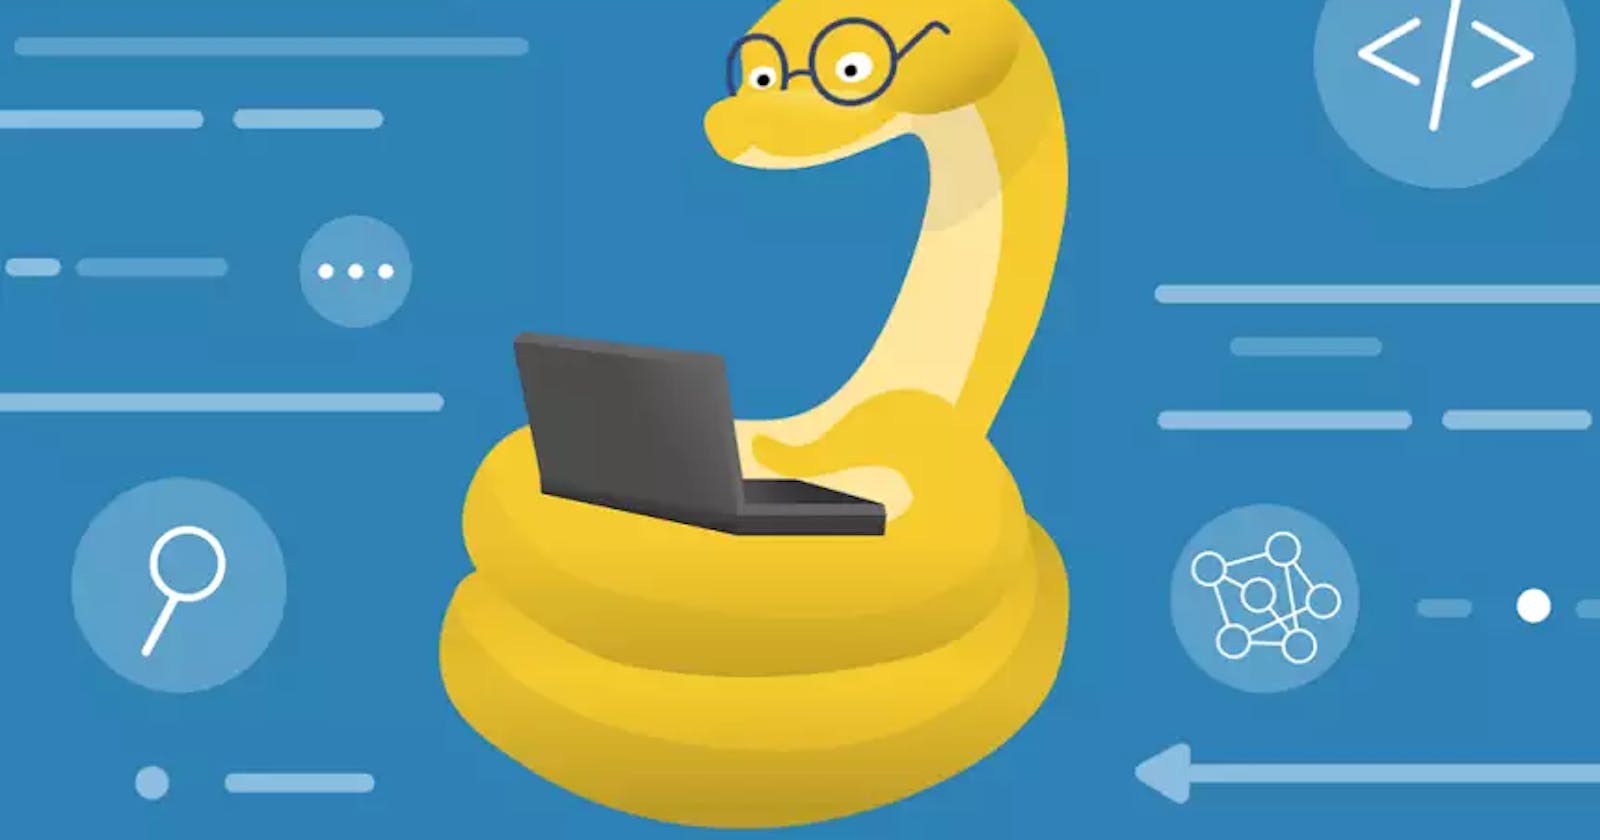 Are you ready for PYTHON?